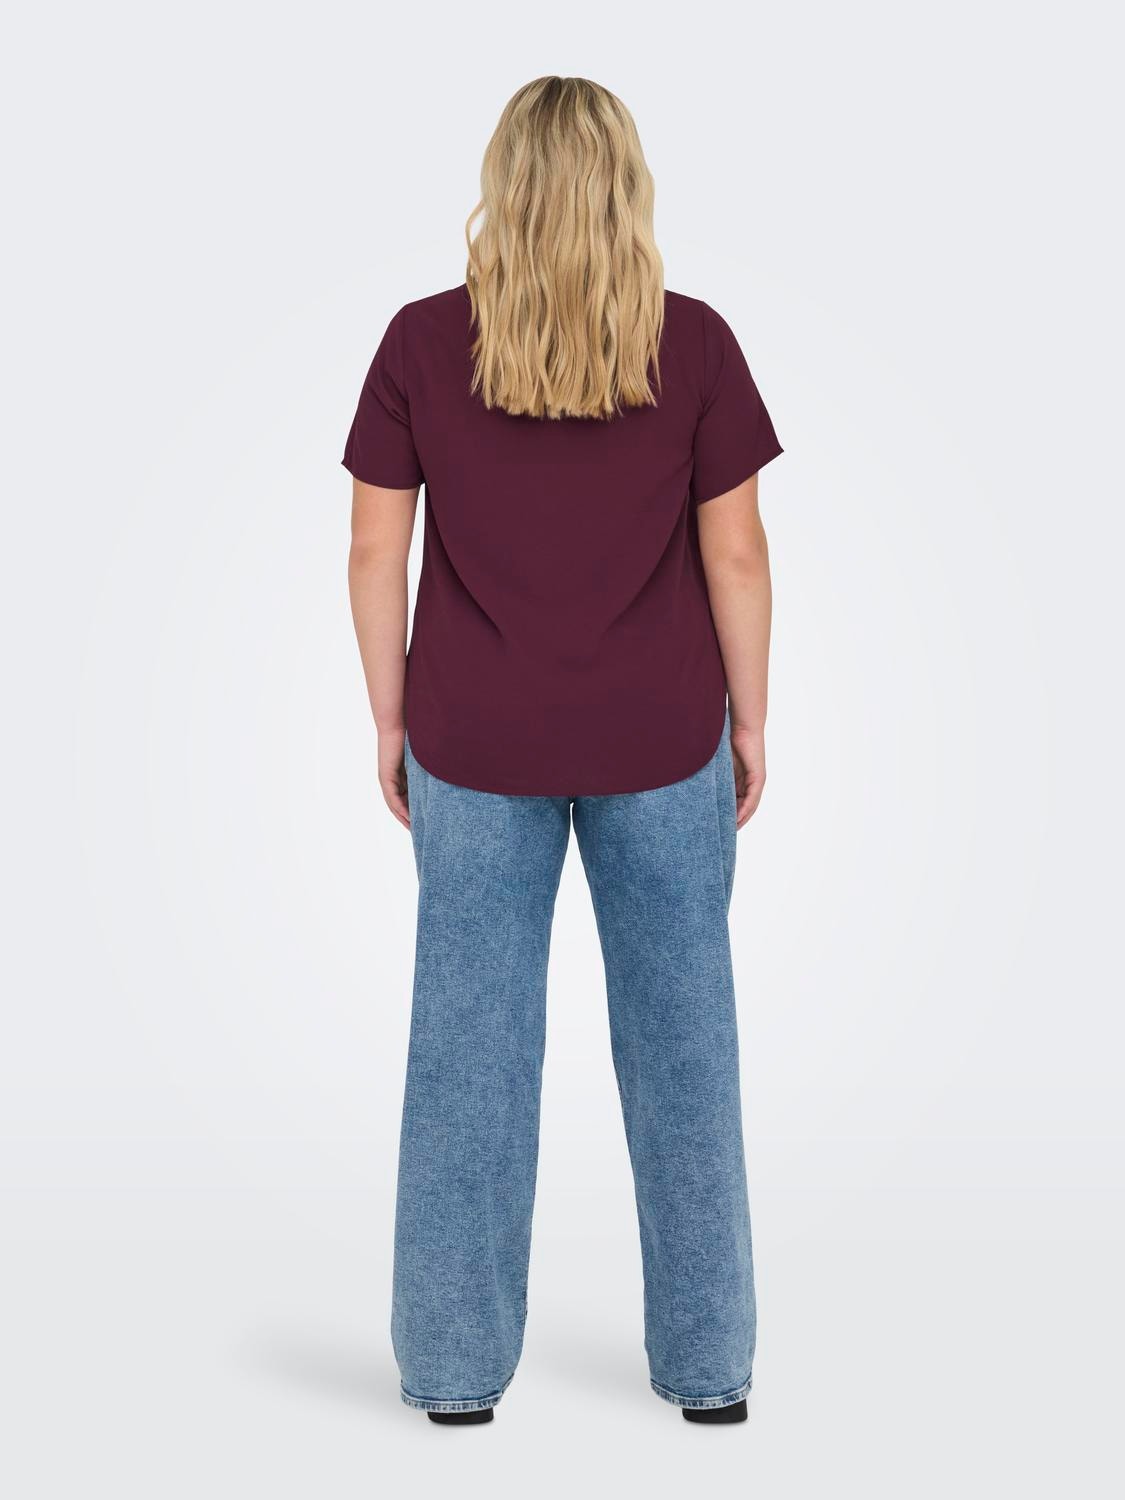 ONLY Curvy short sleeve Top -Port Royale - 15218353